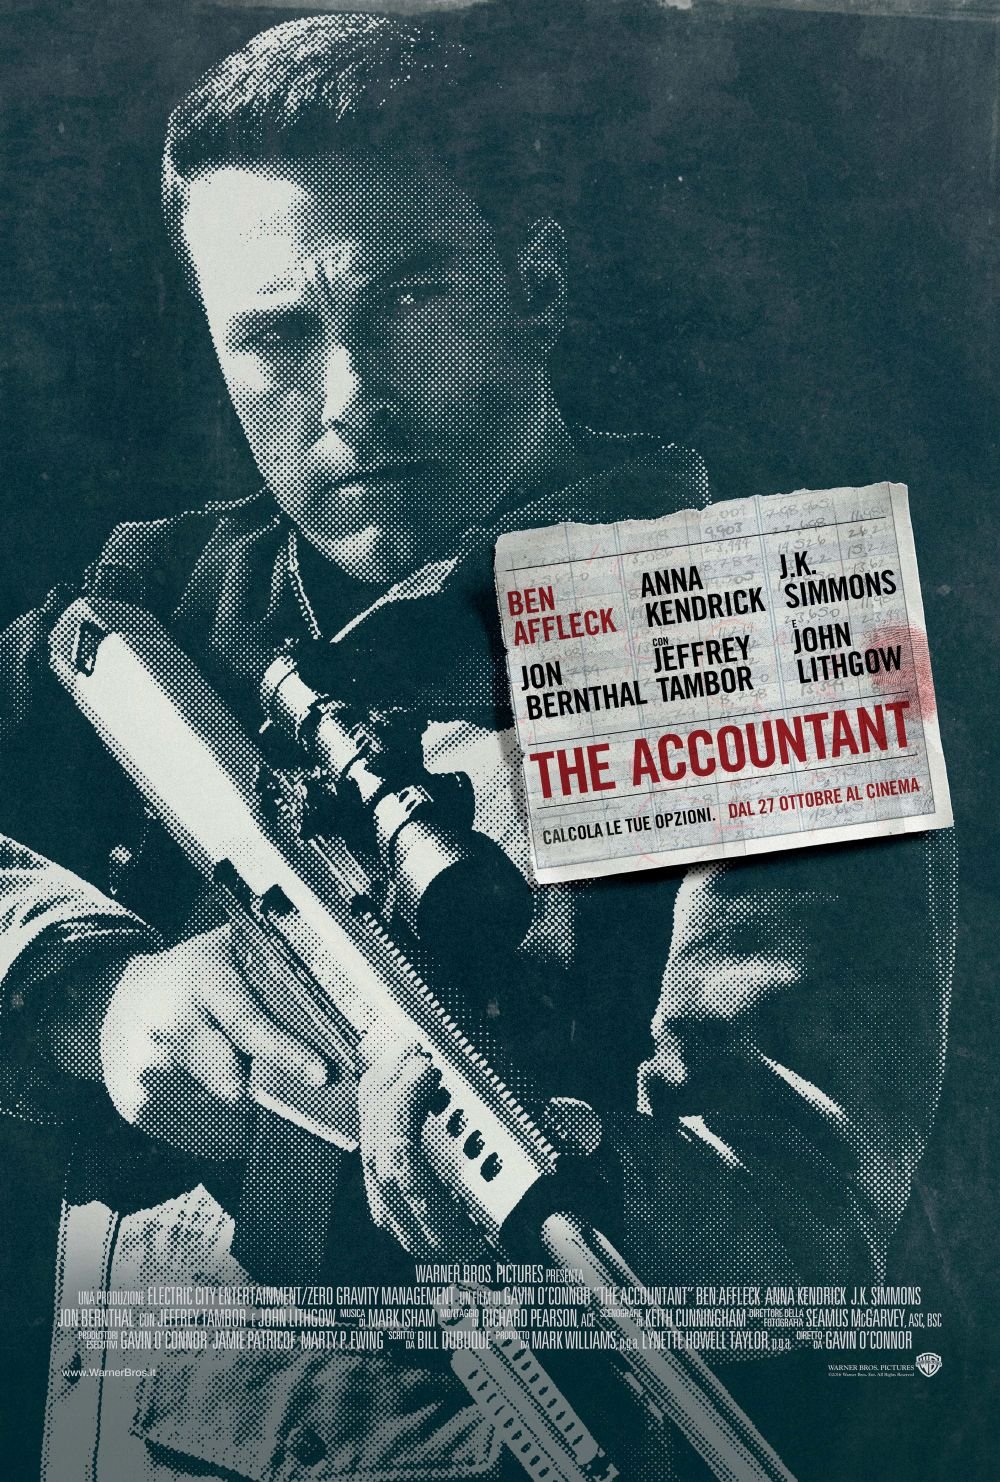 https://movieplayer.it/film/the-accountant_41576/